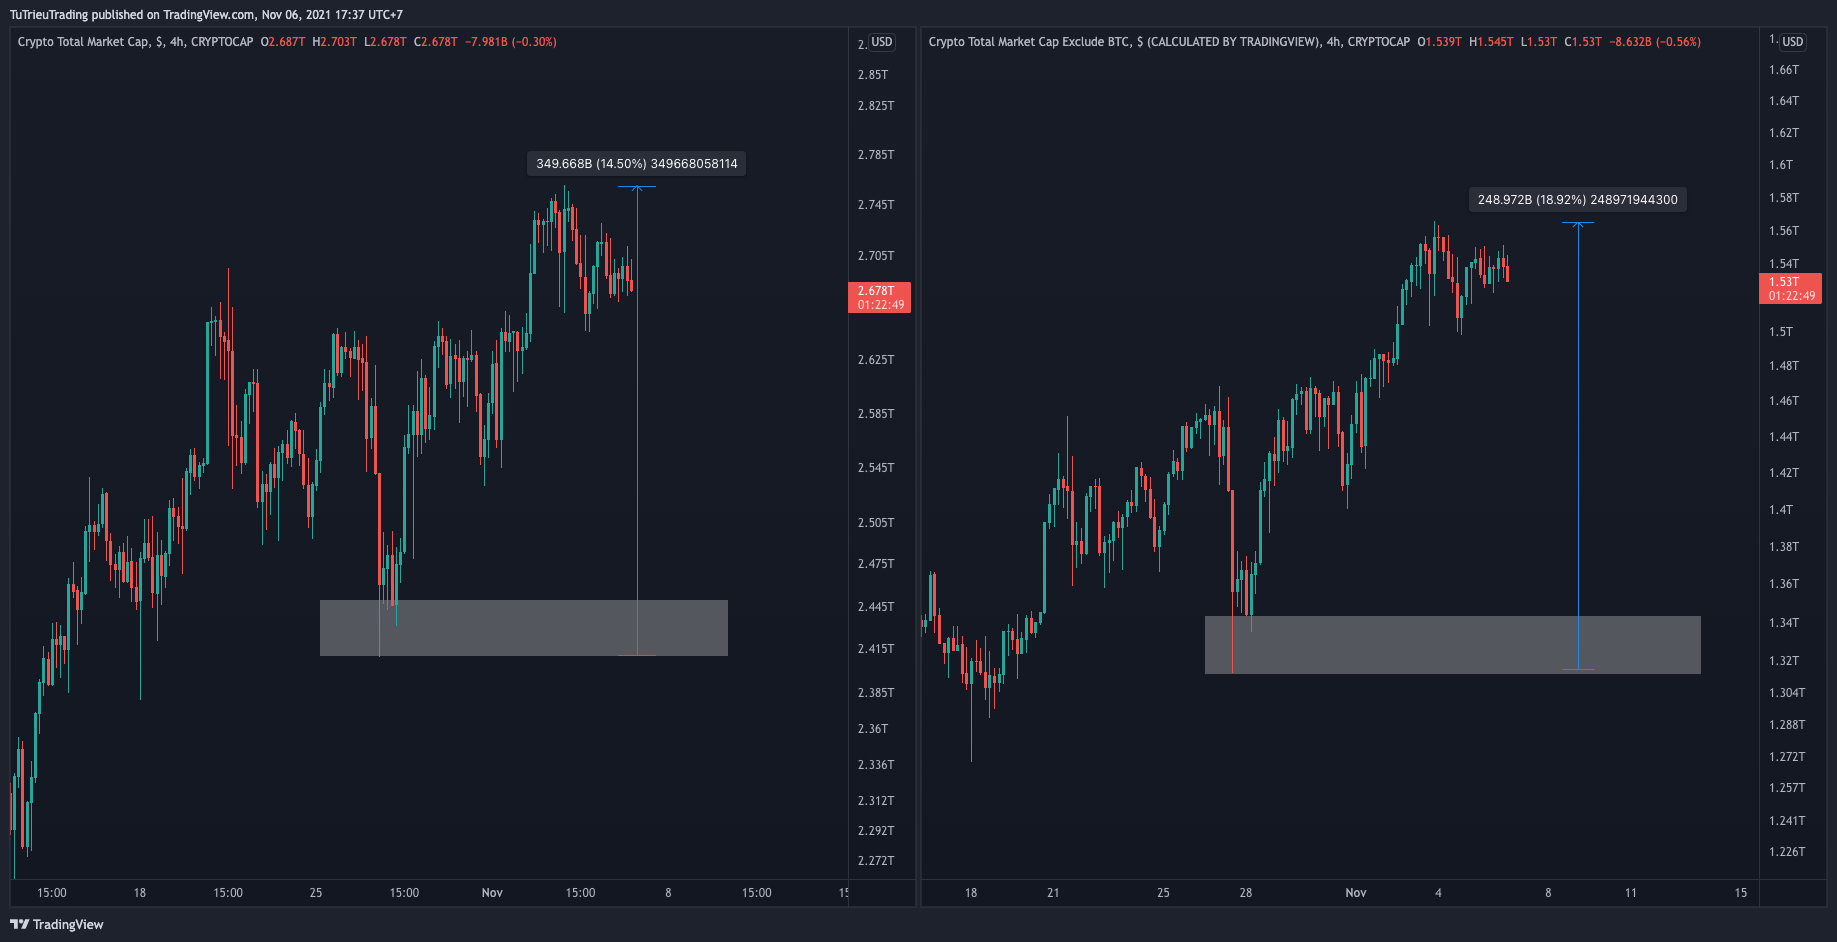 Total & Total 2 daily chart. Source: TradingView